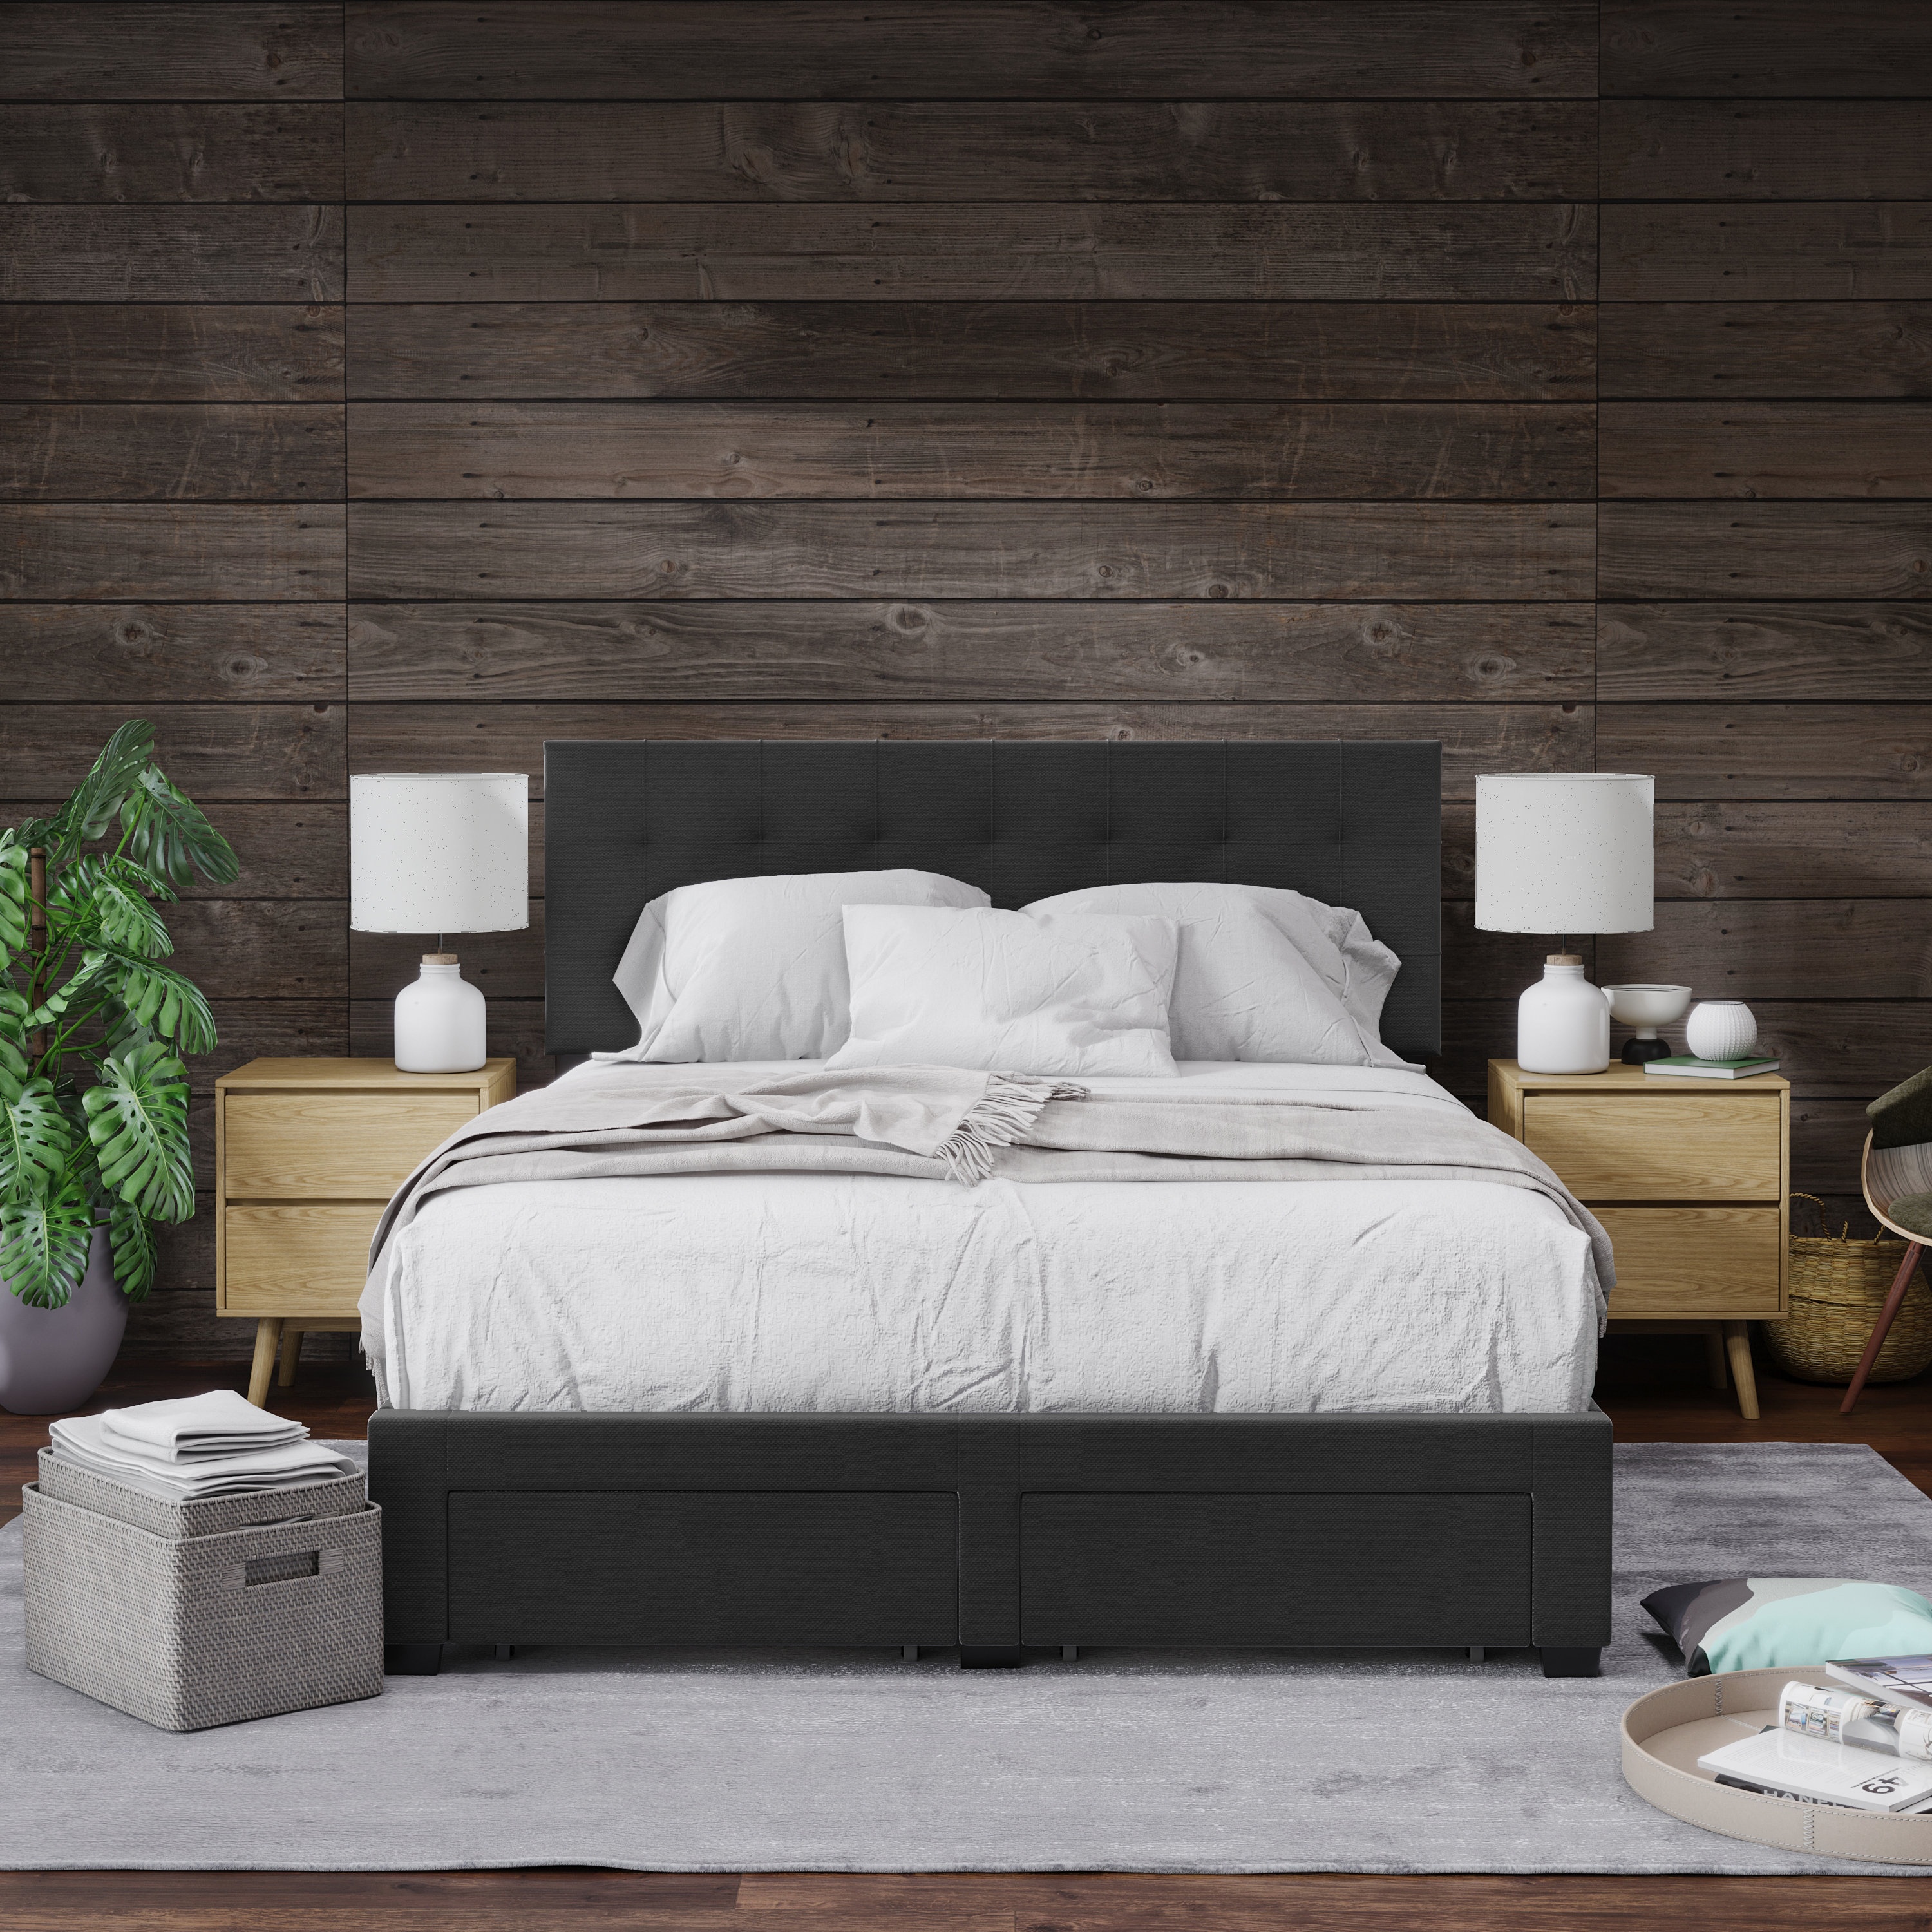 Acme Ireland King Bed with Storage in Black India